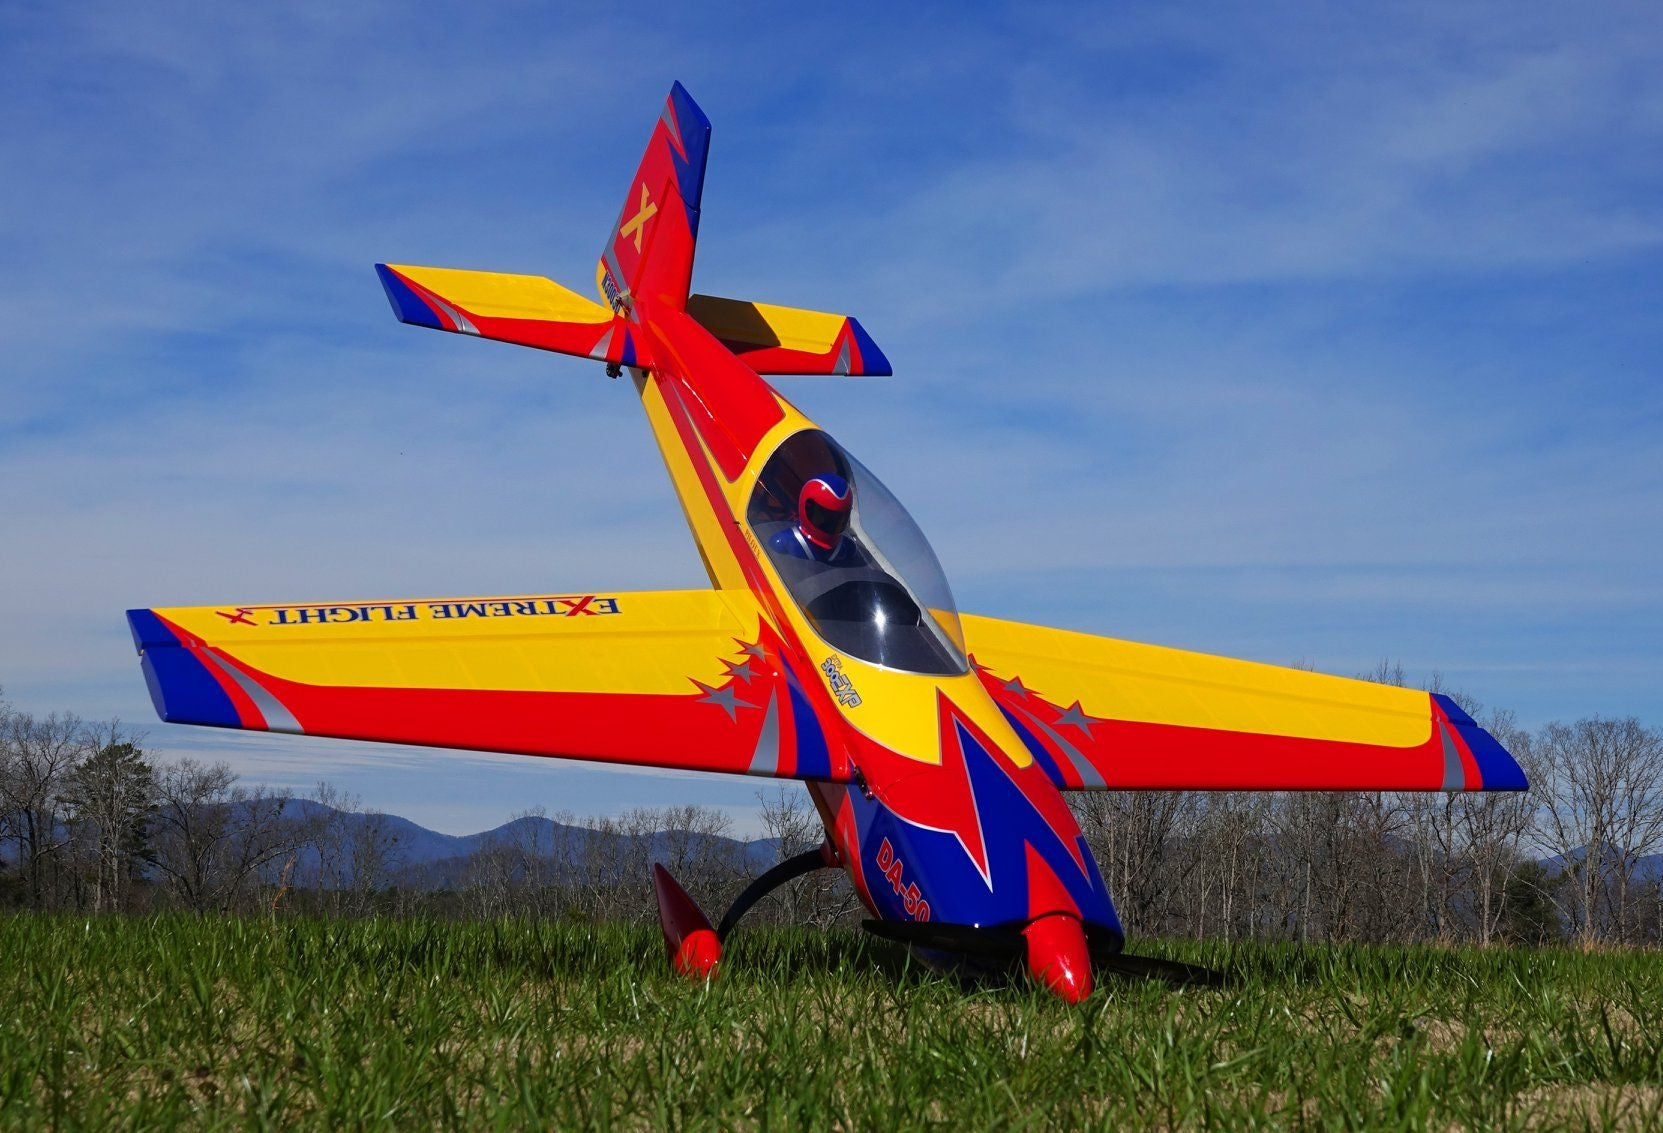 Extreme Flight Extra 300 EXP 85" Yellow/Red/Blue